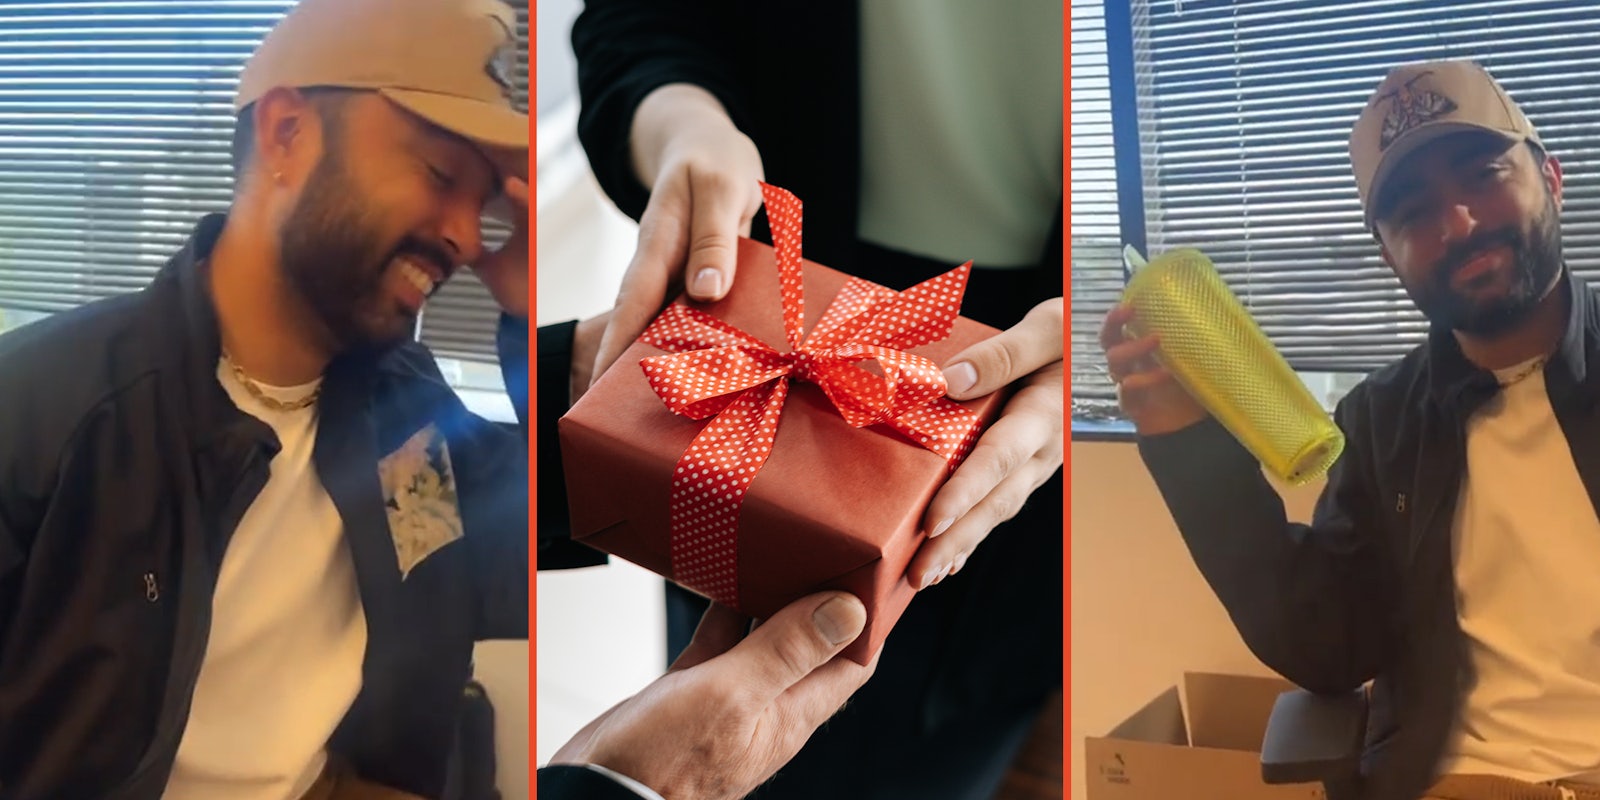 Worker Googles their colleague’s white elephant gift to them, shocked at what they find